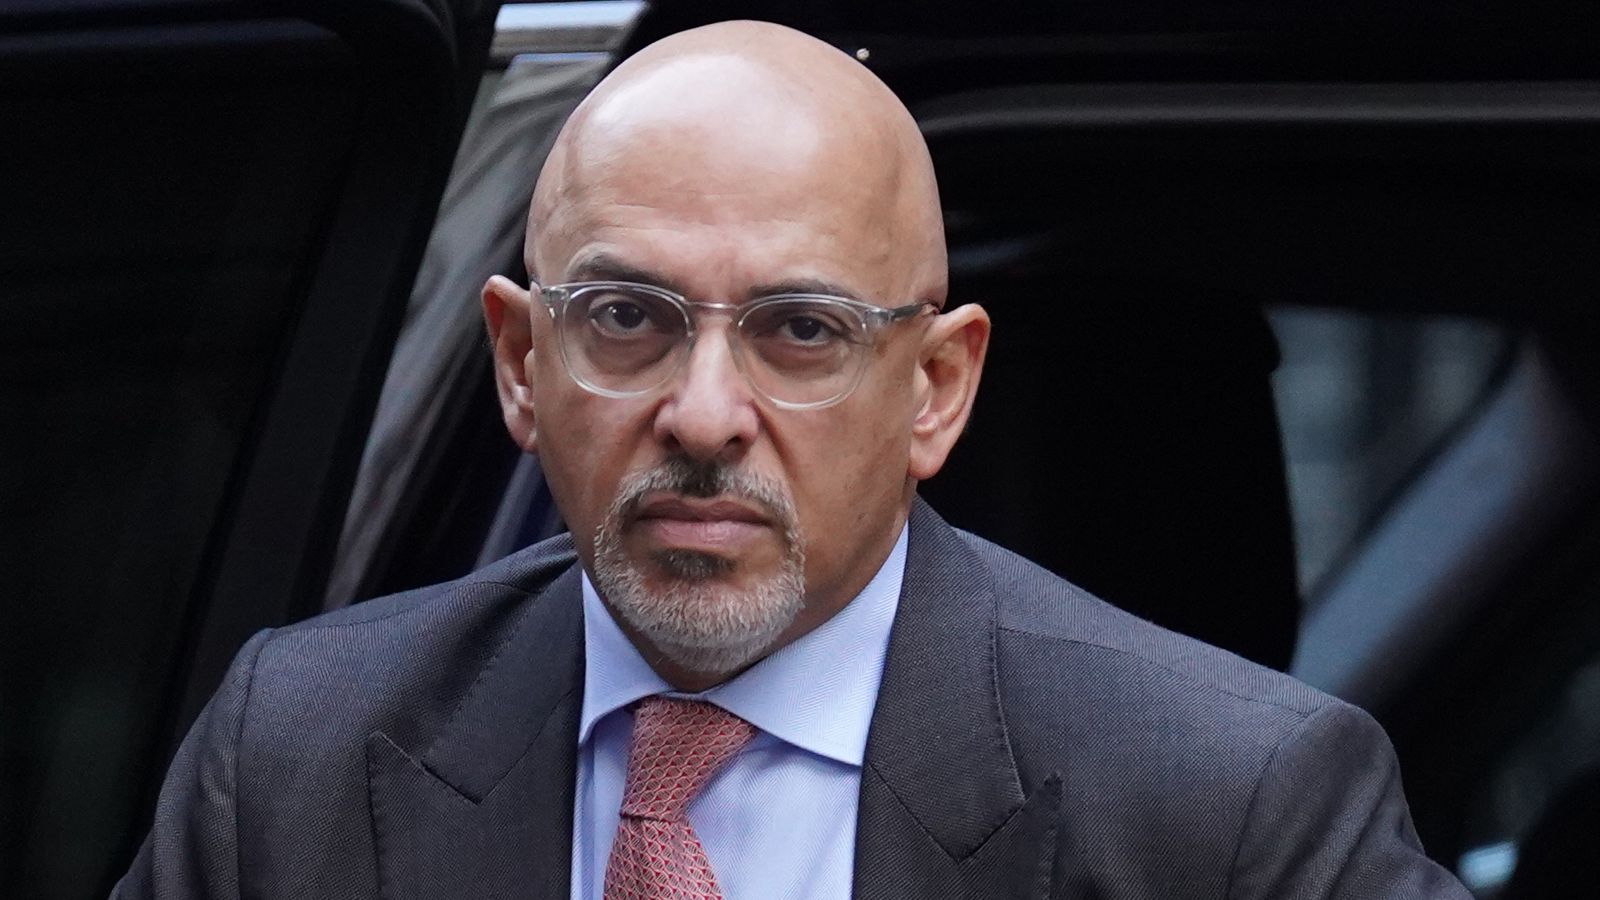 First Tory MP publicly calls for Nadhim Zahawi to go - 'too many unanswered questions' over tax affairs